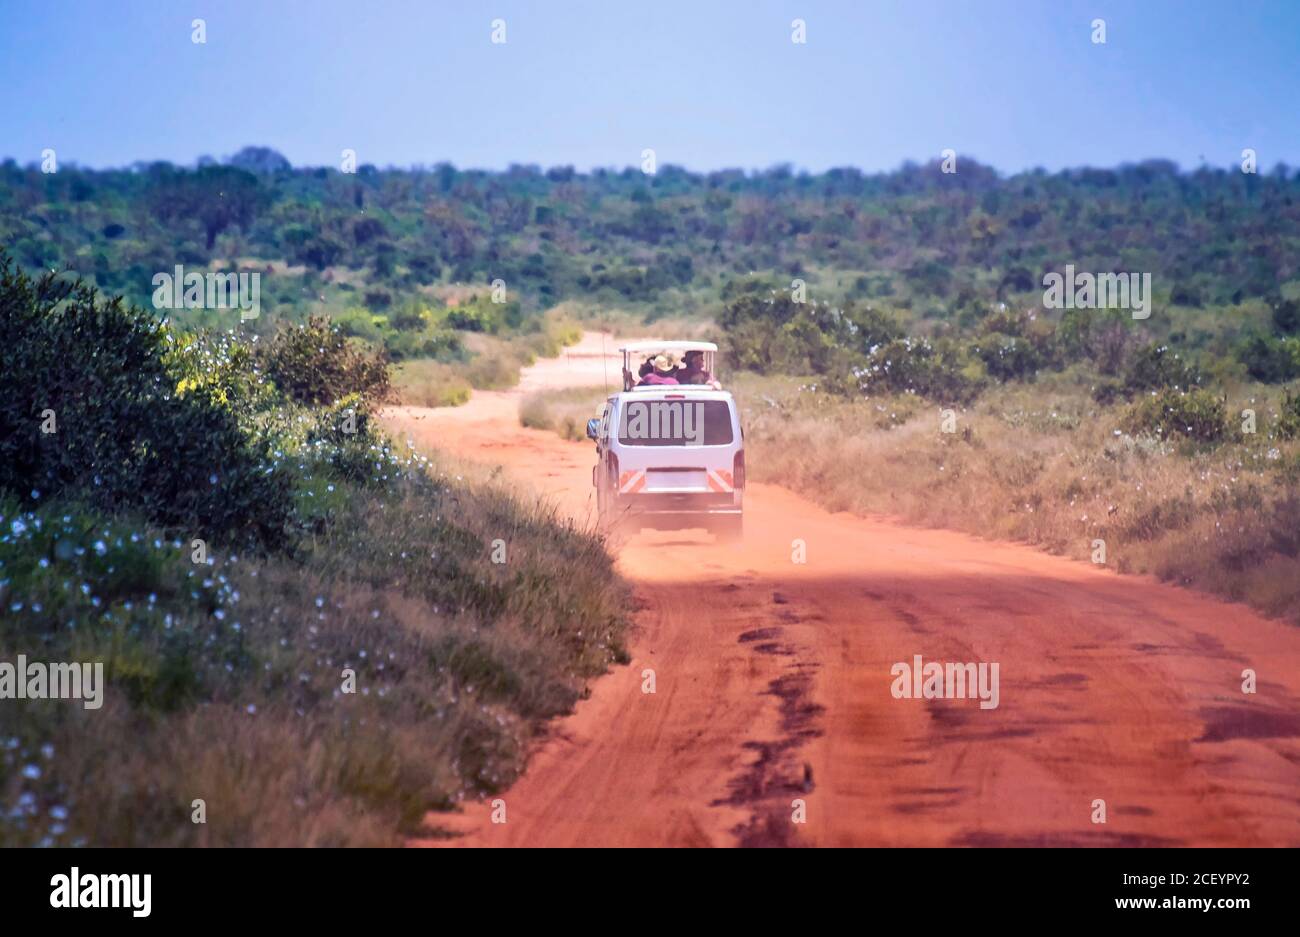 The car is driving on a dirt road in Tsavo National Park East Kenya. People are on a safari trip in nature. Stock Photo